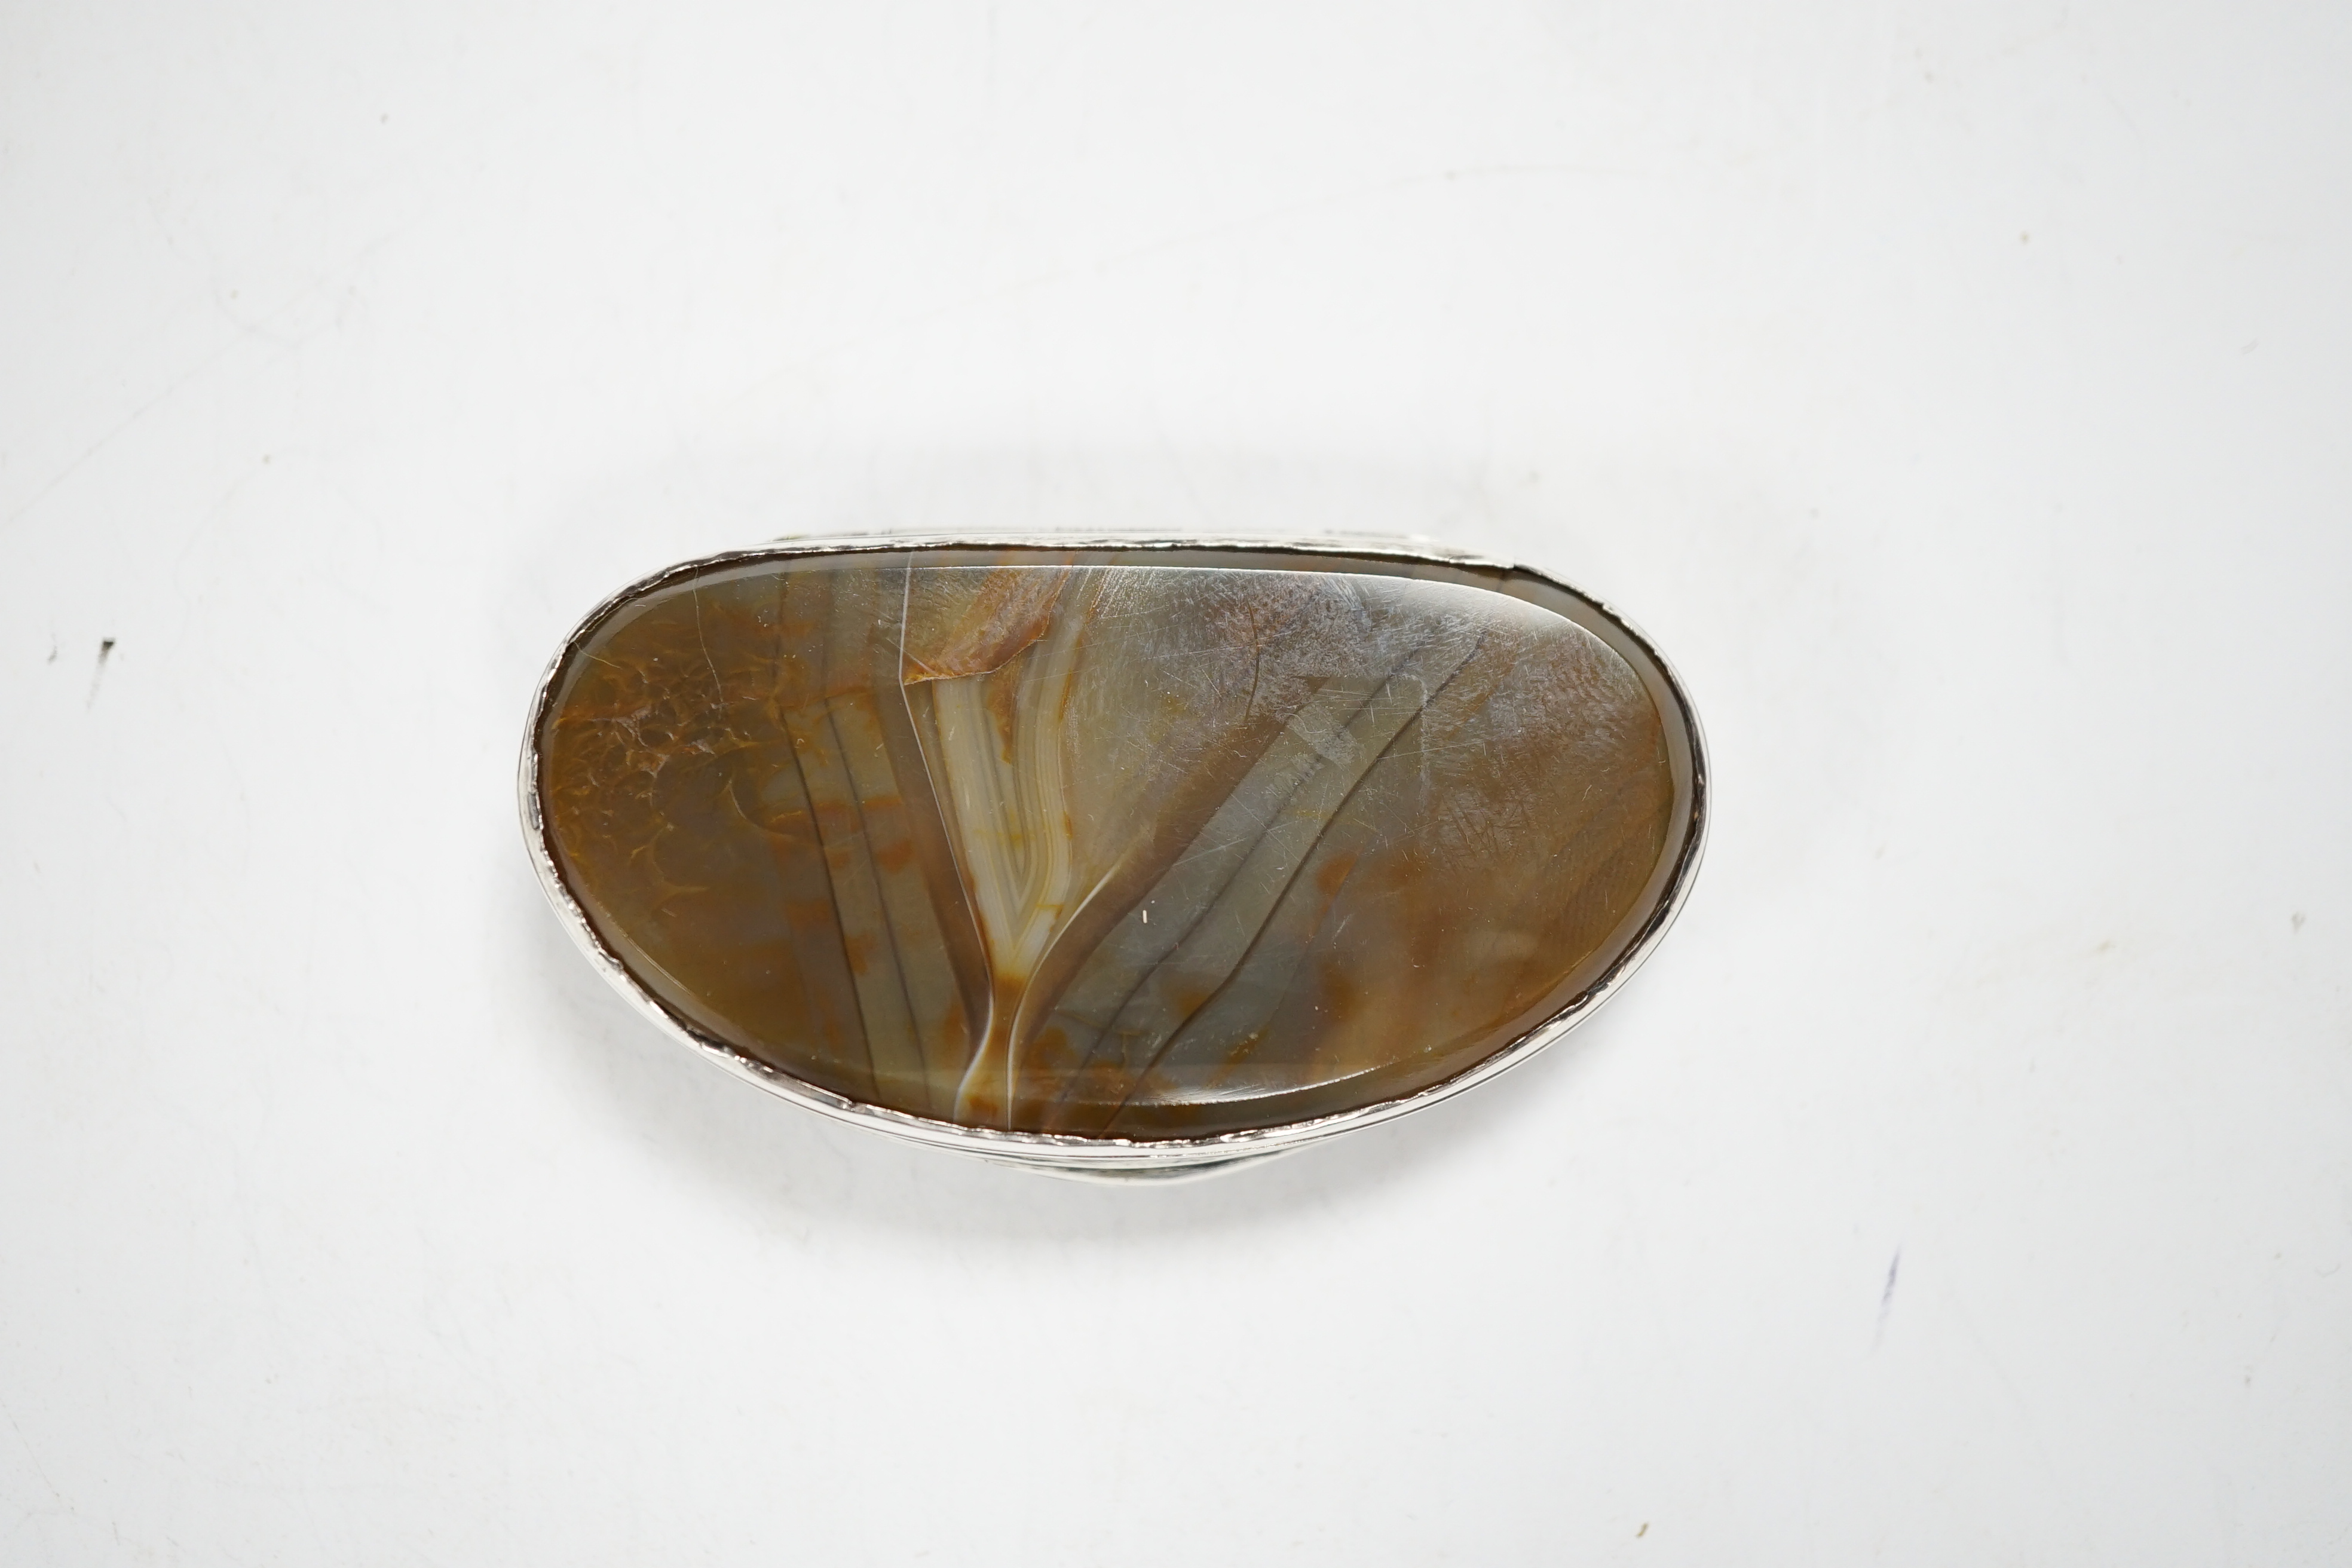 An early 19th century Scottish? white metal oval snuff box, with banded agate base and inset agate lid, decorated with dogs and scrolls, 69mm.